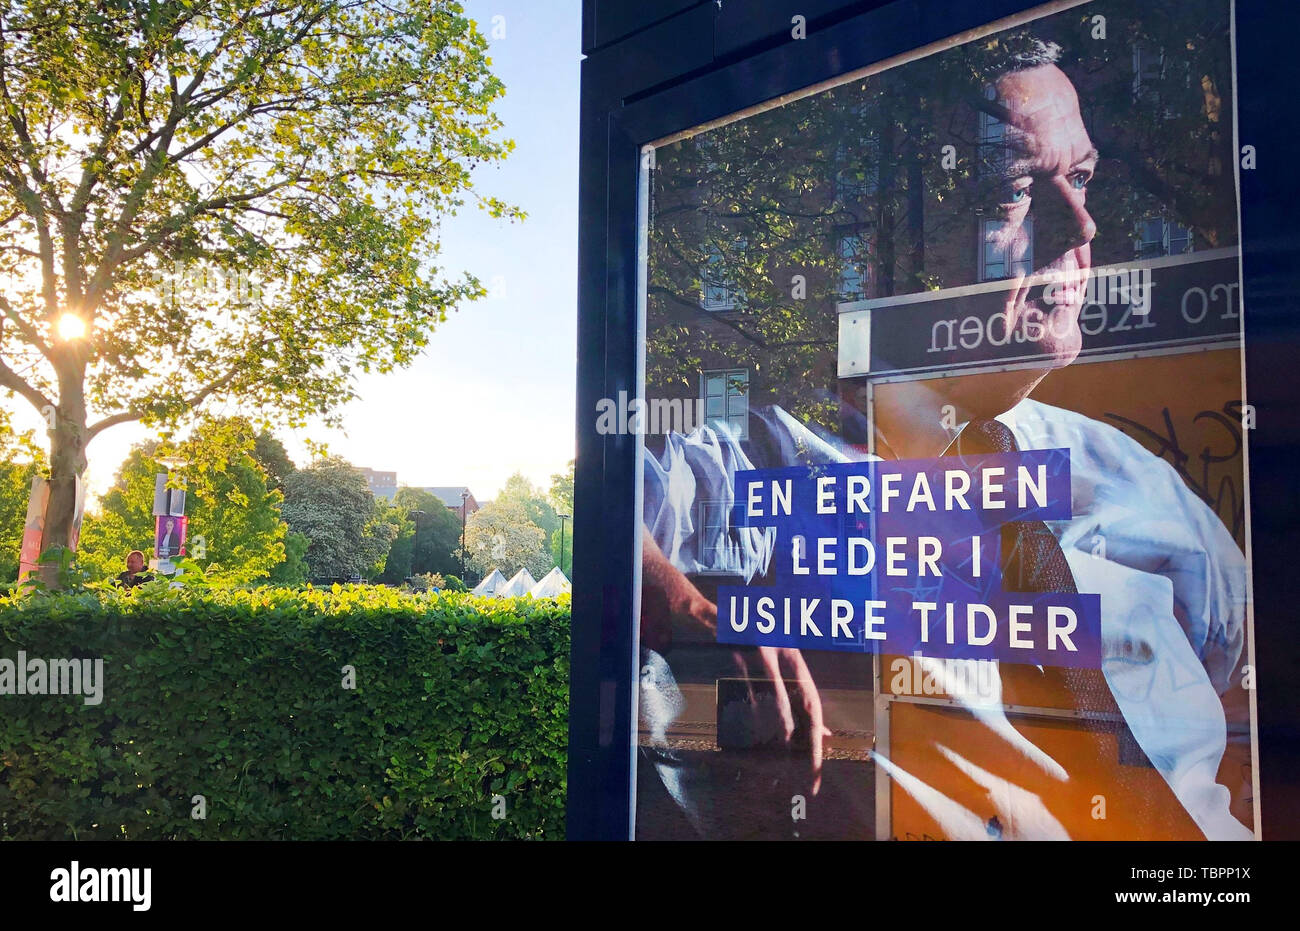 Kopenhagen, Denmark. 25th May, 2019. The liberal party Venstre advertises on an election poster at a bus stop for the incumbent head of government Lars Lokke Rasmussen. The poster says "experienced leather i usikre tider" (an experienced leader in our times). On 05 June a new parliament is elected in Denmark. (to dpa "Denmark chooses - Social Democrats hope for ray of hope") Credit: Steffen Trumpf/dpa/Alamy Live News Stock Photo